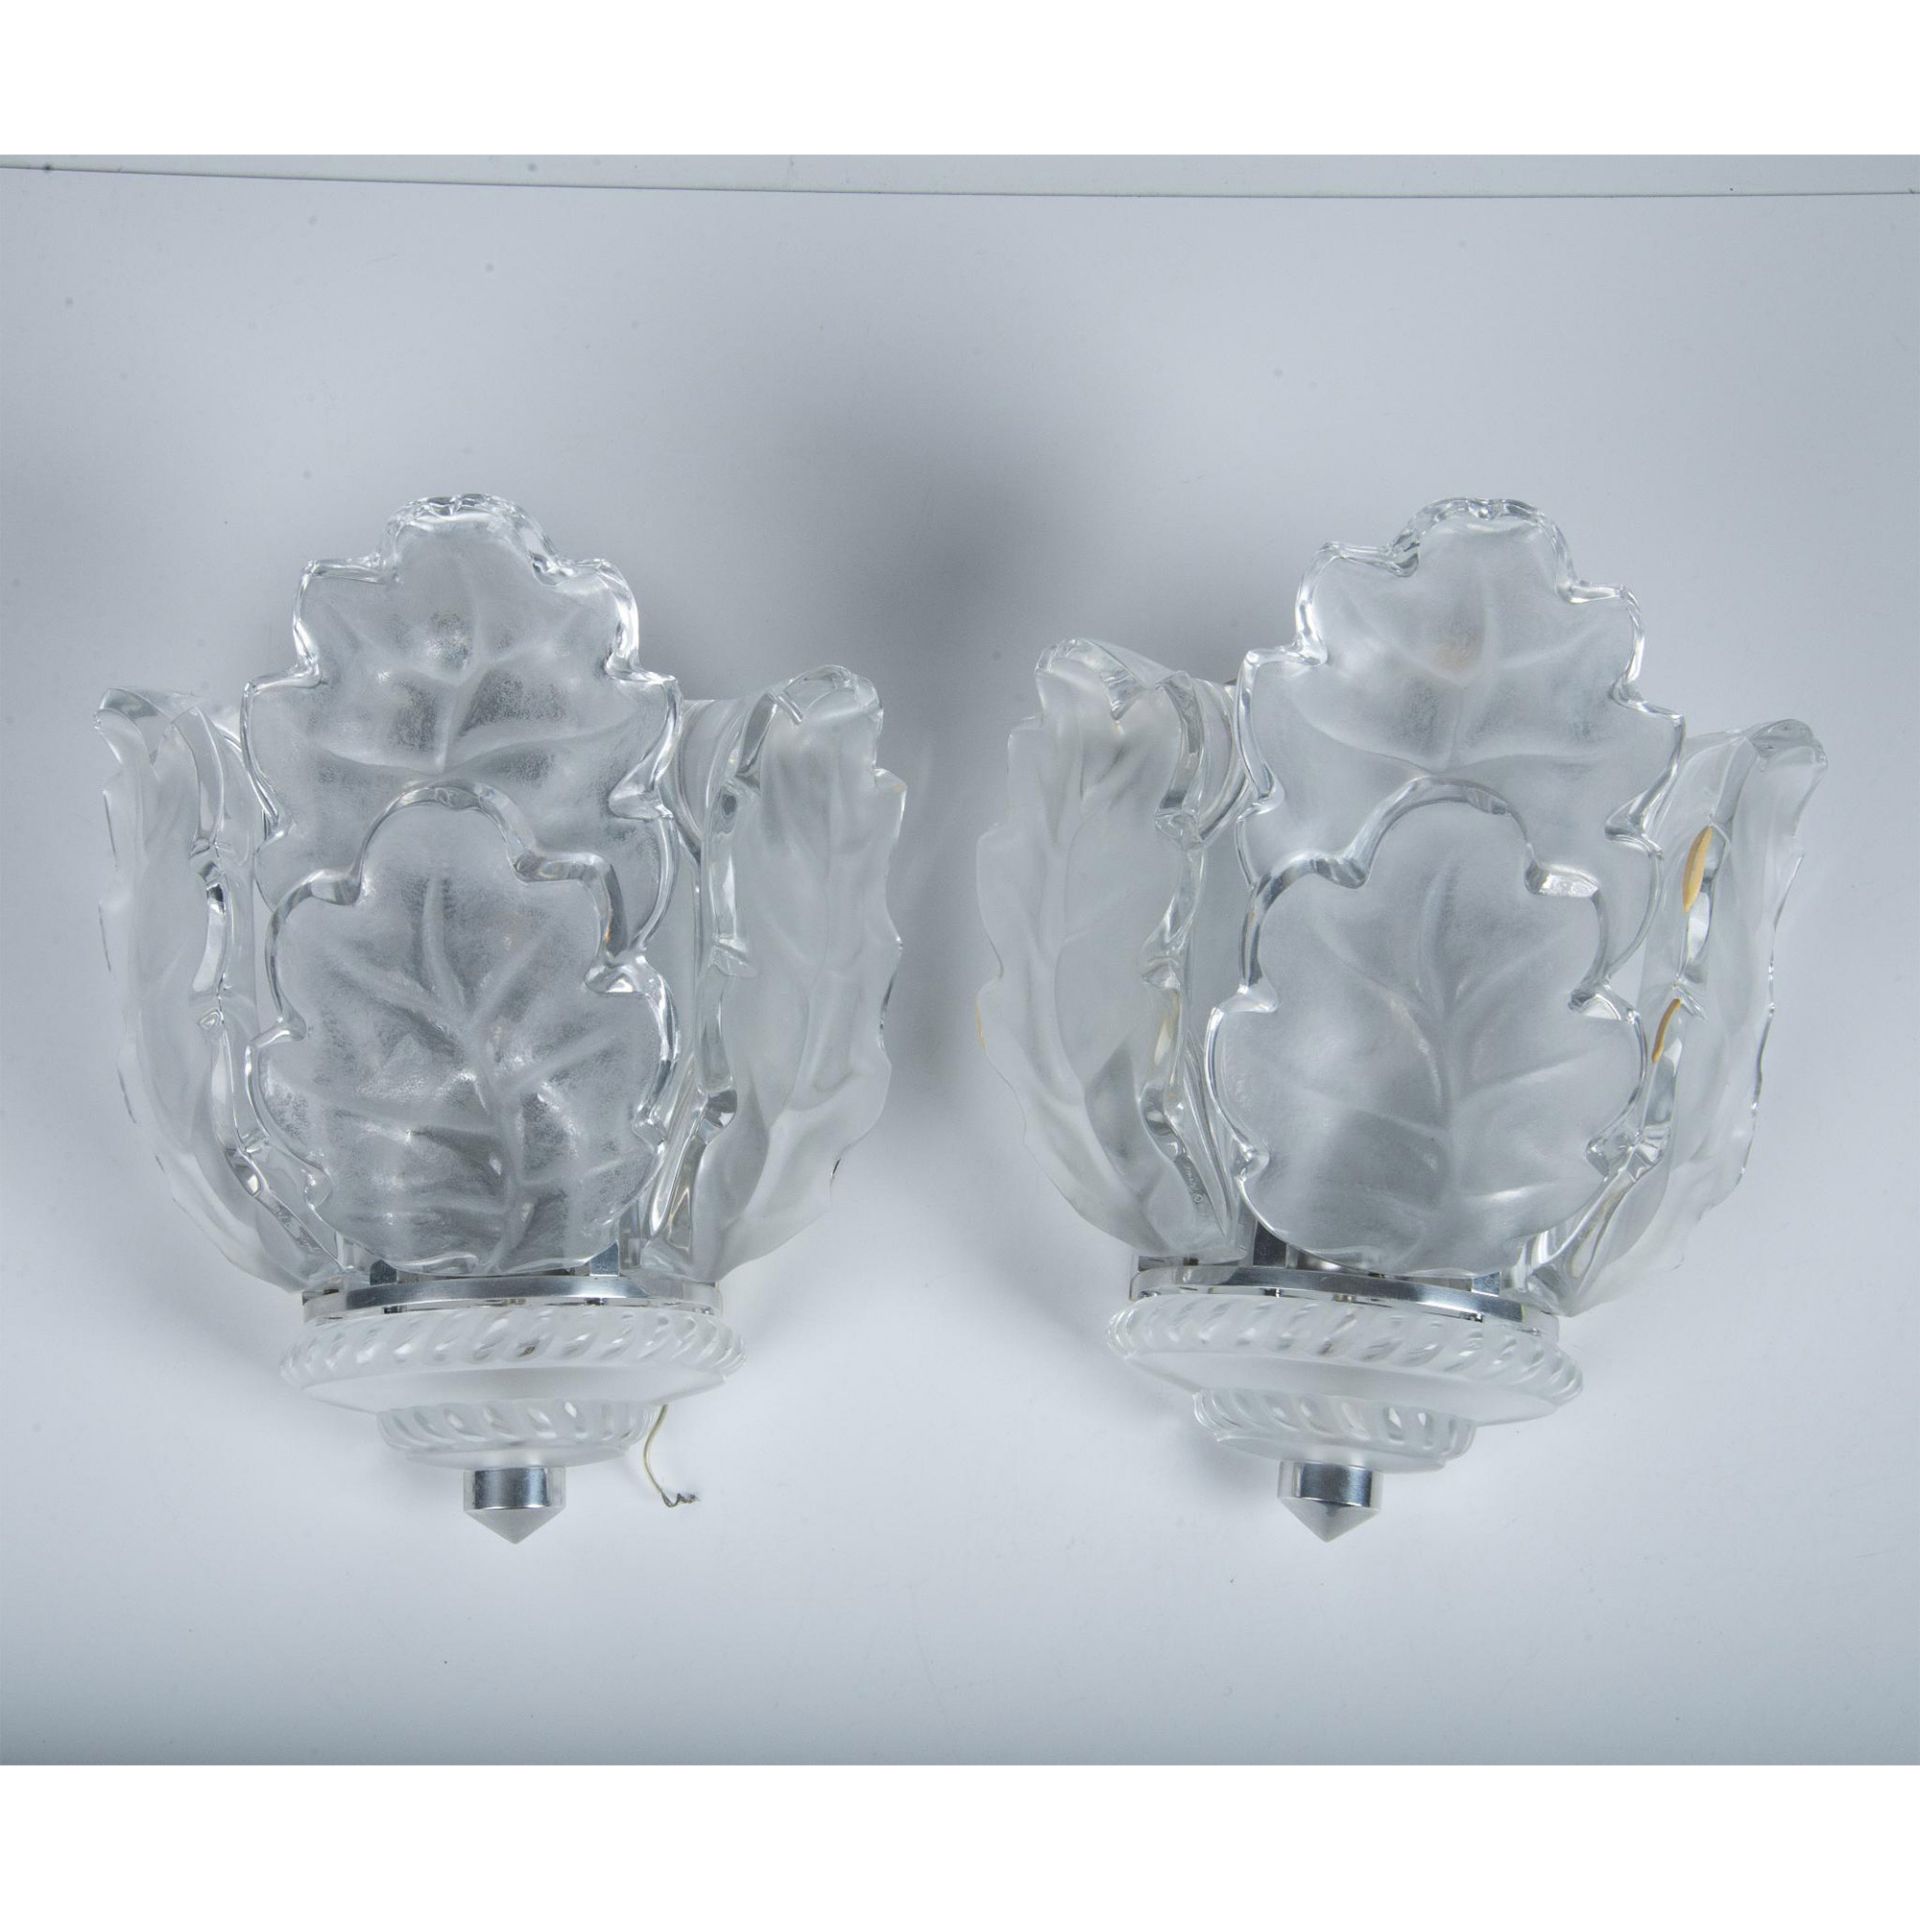 Pair of Lalique French Glass Wall Scones, Chene - Image 3 of 6